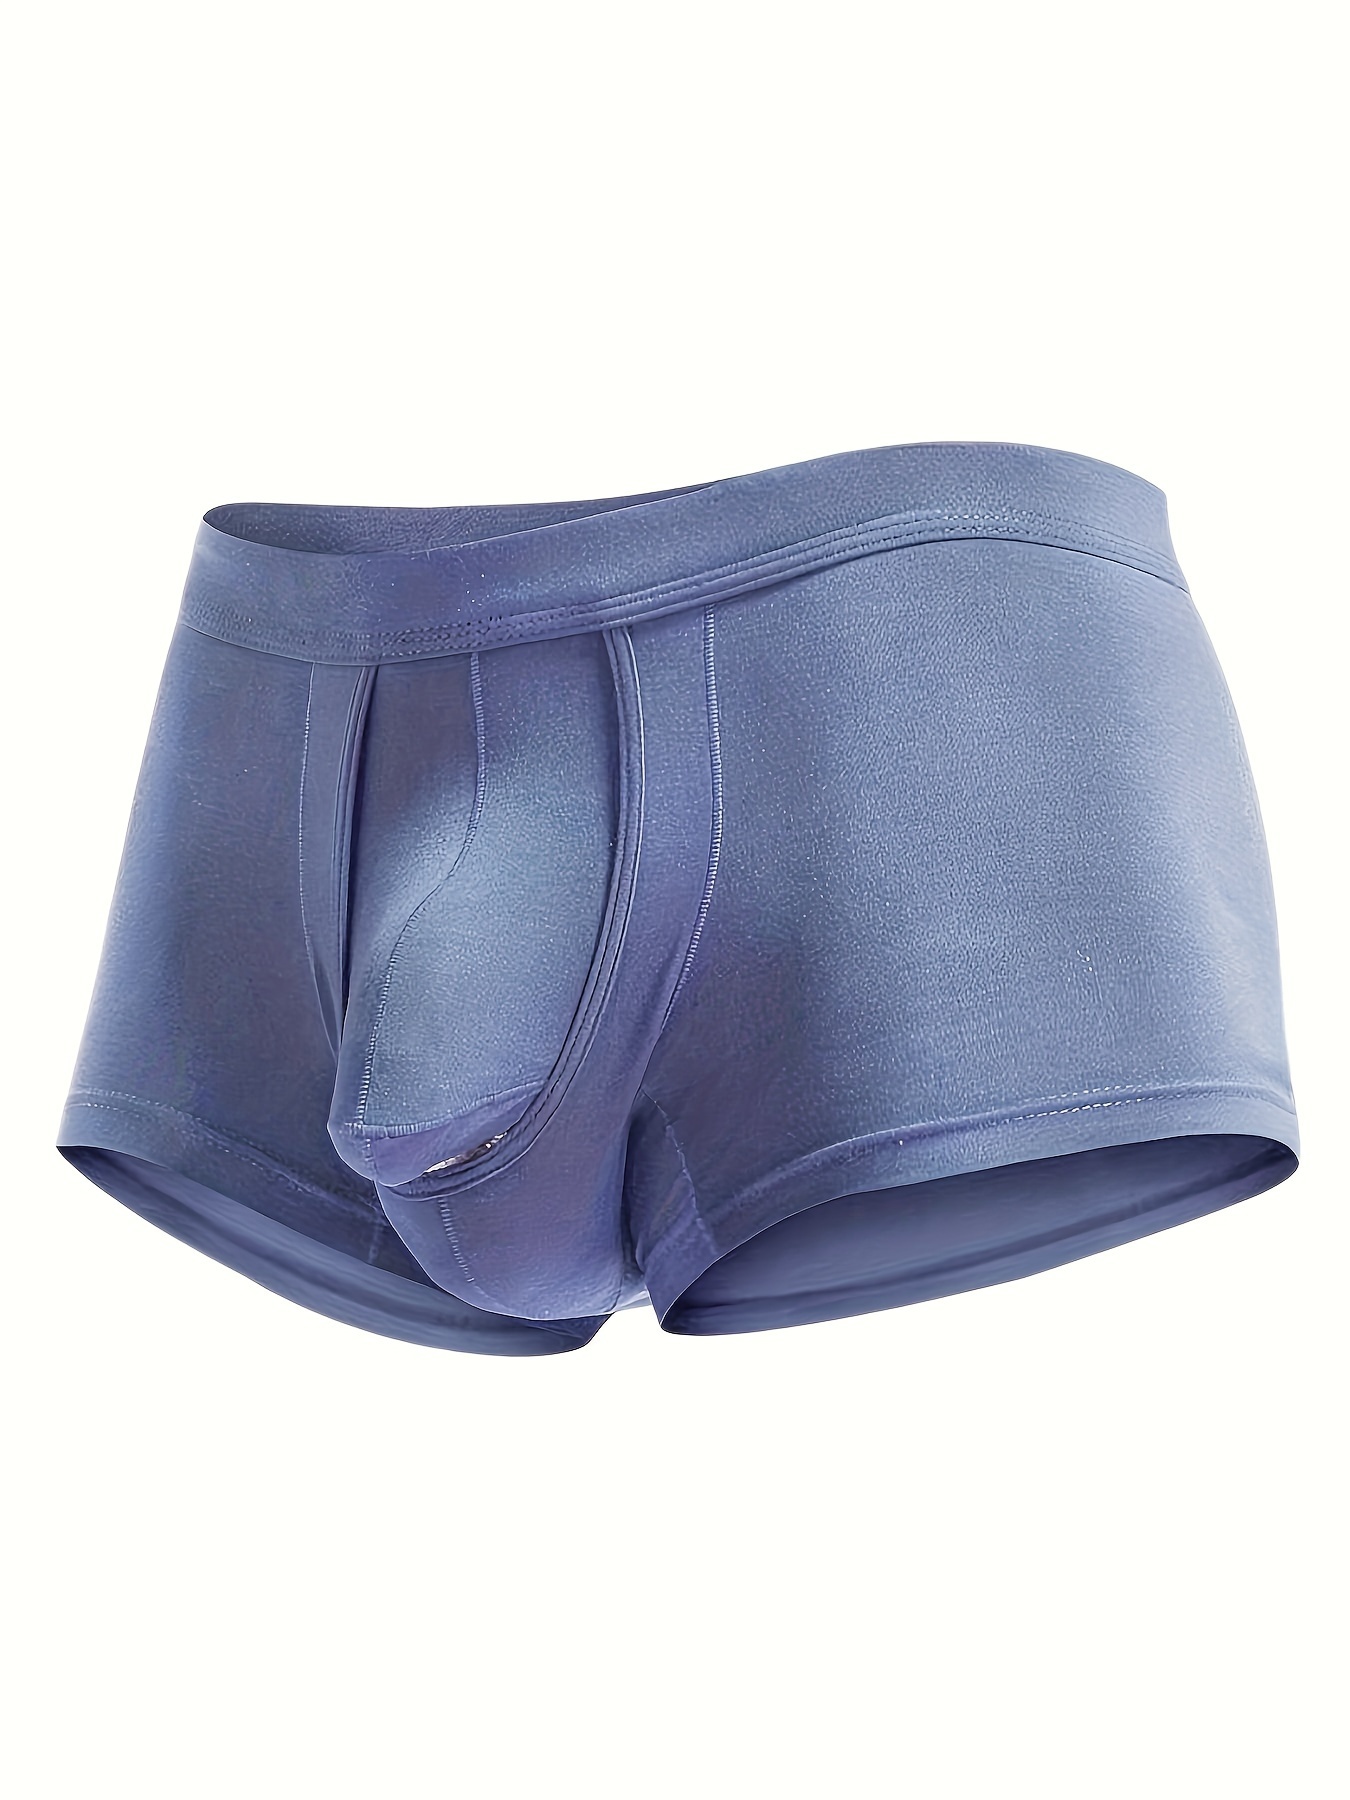 Mens Underwear Separate Penis Ball Pouch Breathable Comfort Sport Boxer  Shorts